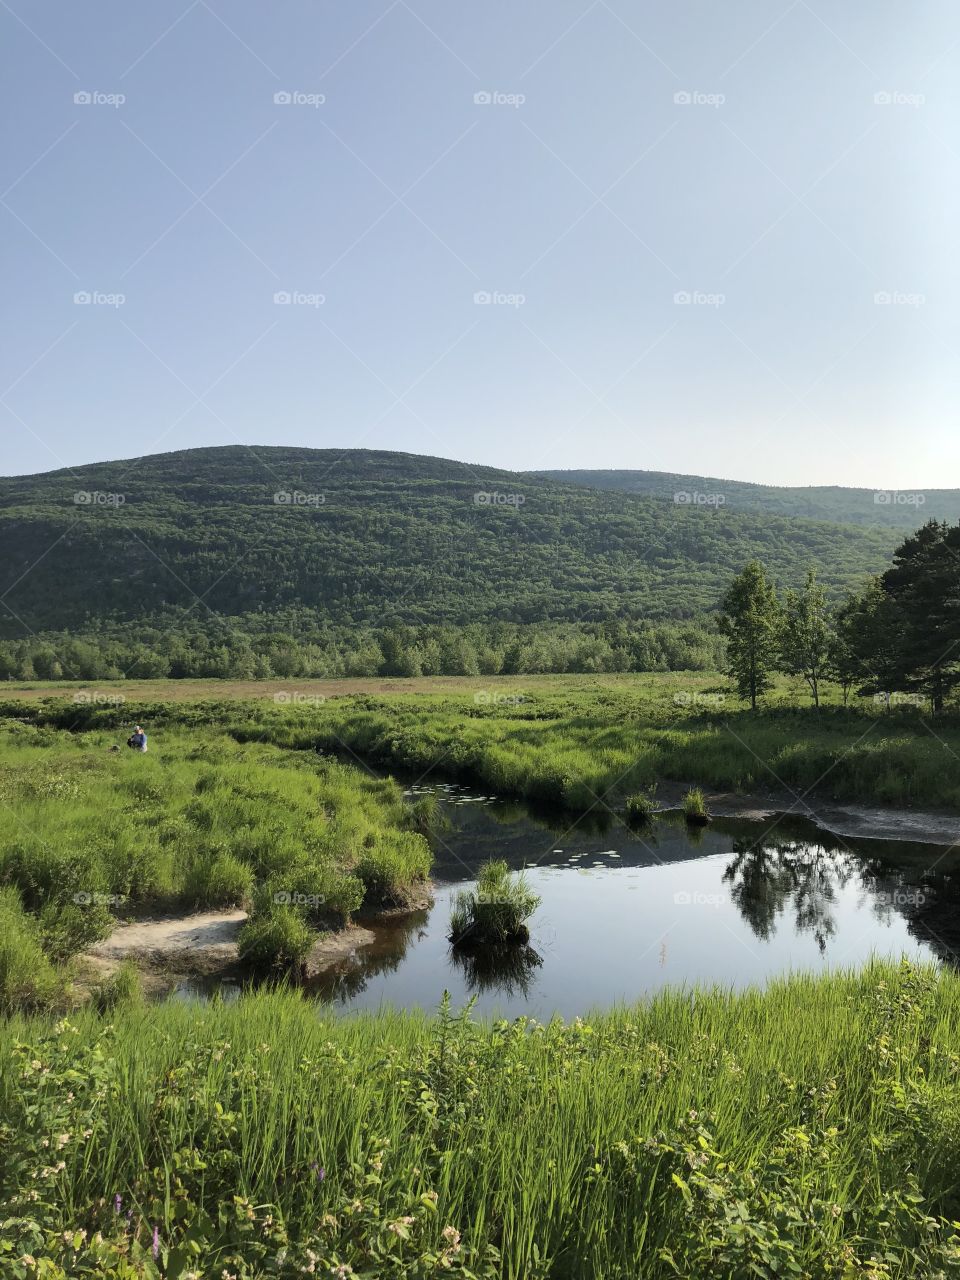 Scenic landscape of green grass and trees surrounding a lake or river in a valley situated between hills and mountains in Acadia National Park in Bar Harbor, Maine USA 